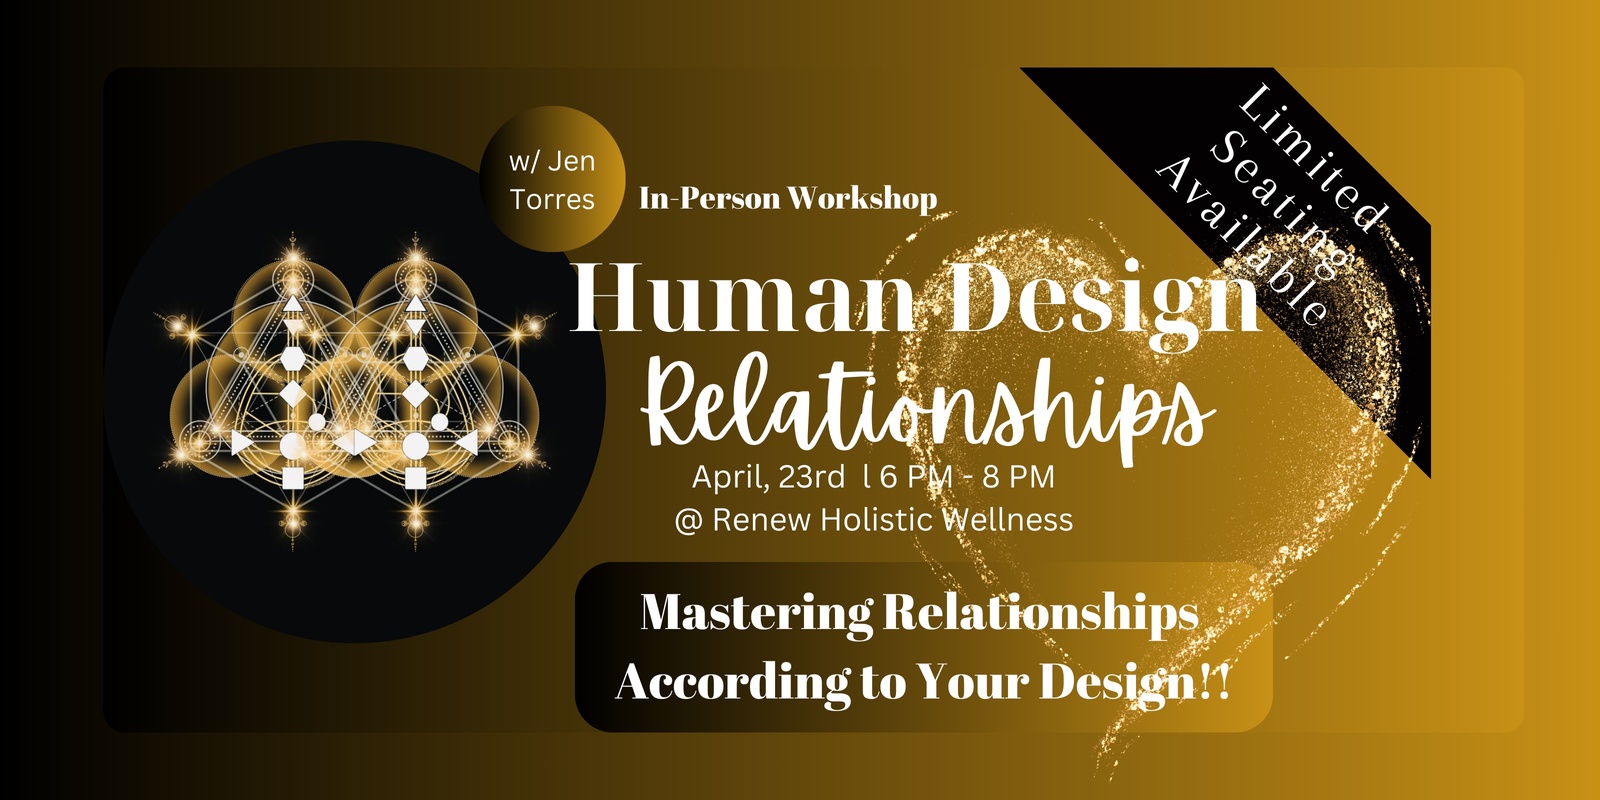 Banner image for Mastering Relationships According to Your Human Design!